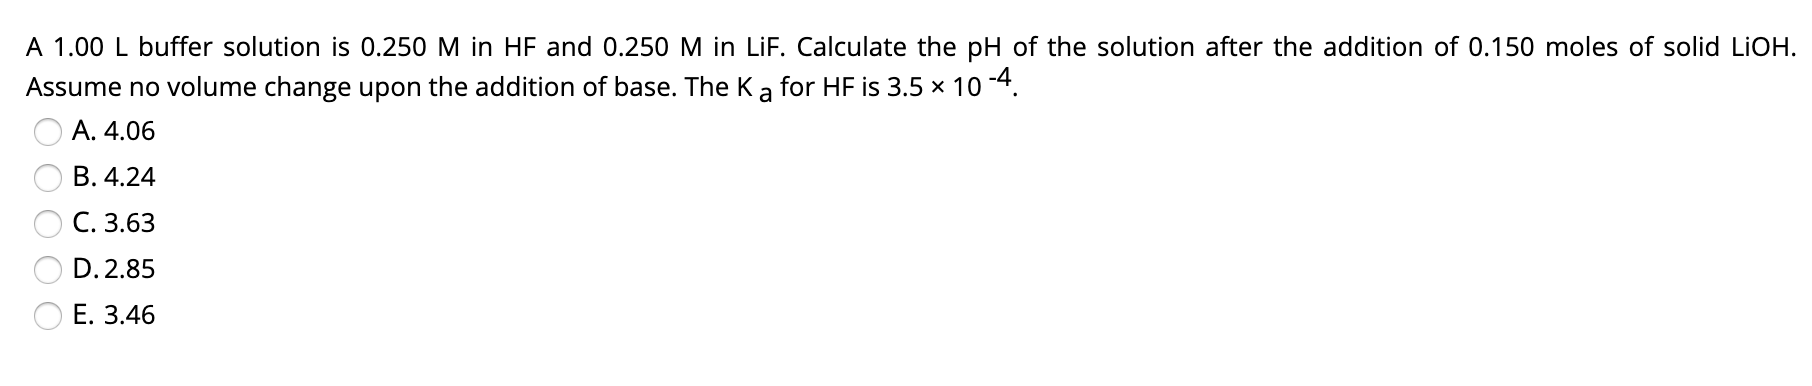 A 1.00 L buffer solution is 0.250 M in HF and 0.250 M in LiF. Calculate the pH of the solution after the addition of 0.150 moles of solid LIOH.
Assume no volume change upon the addition of base. The Ka for HF is 3.5 x 10 -4.
A. 4.06
B. 4.24
C. 3.63
D. 2.85
Е. З.46
